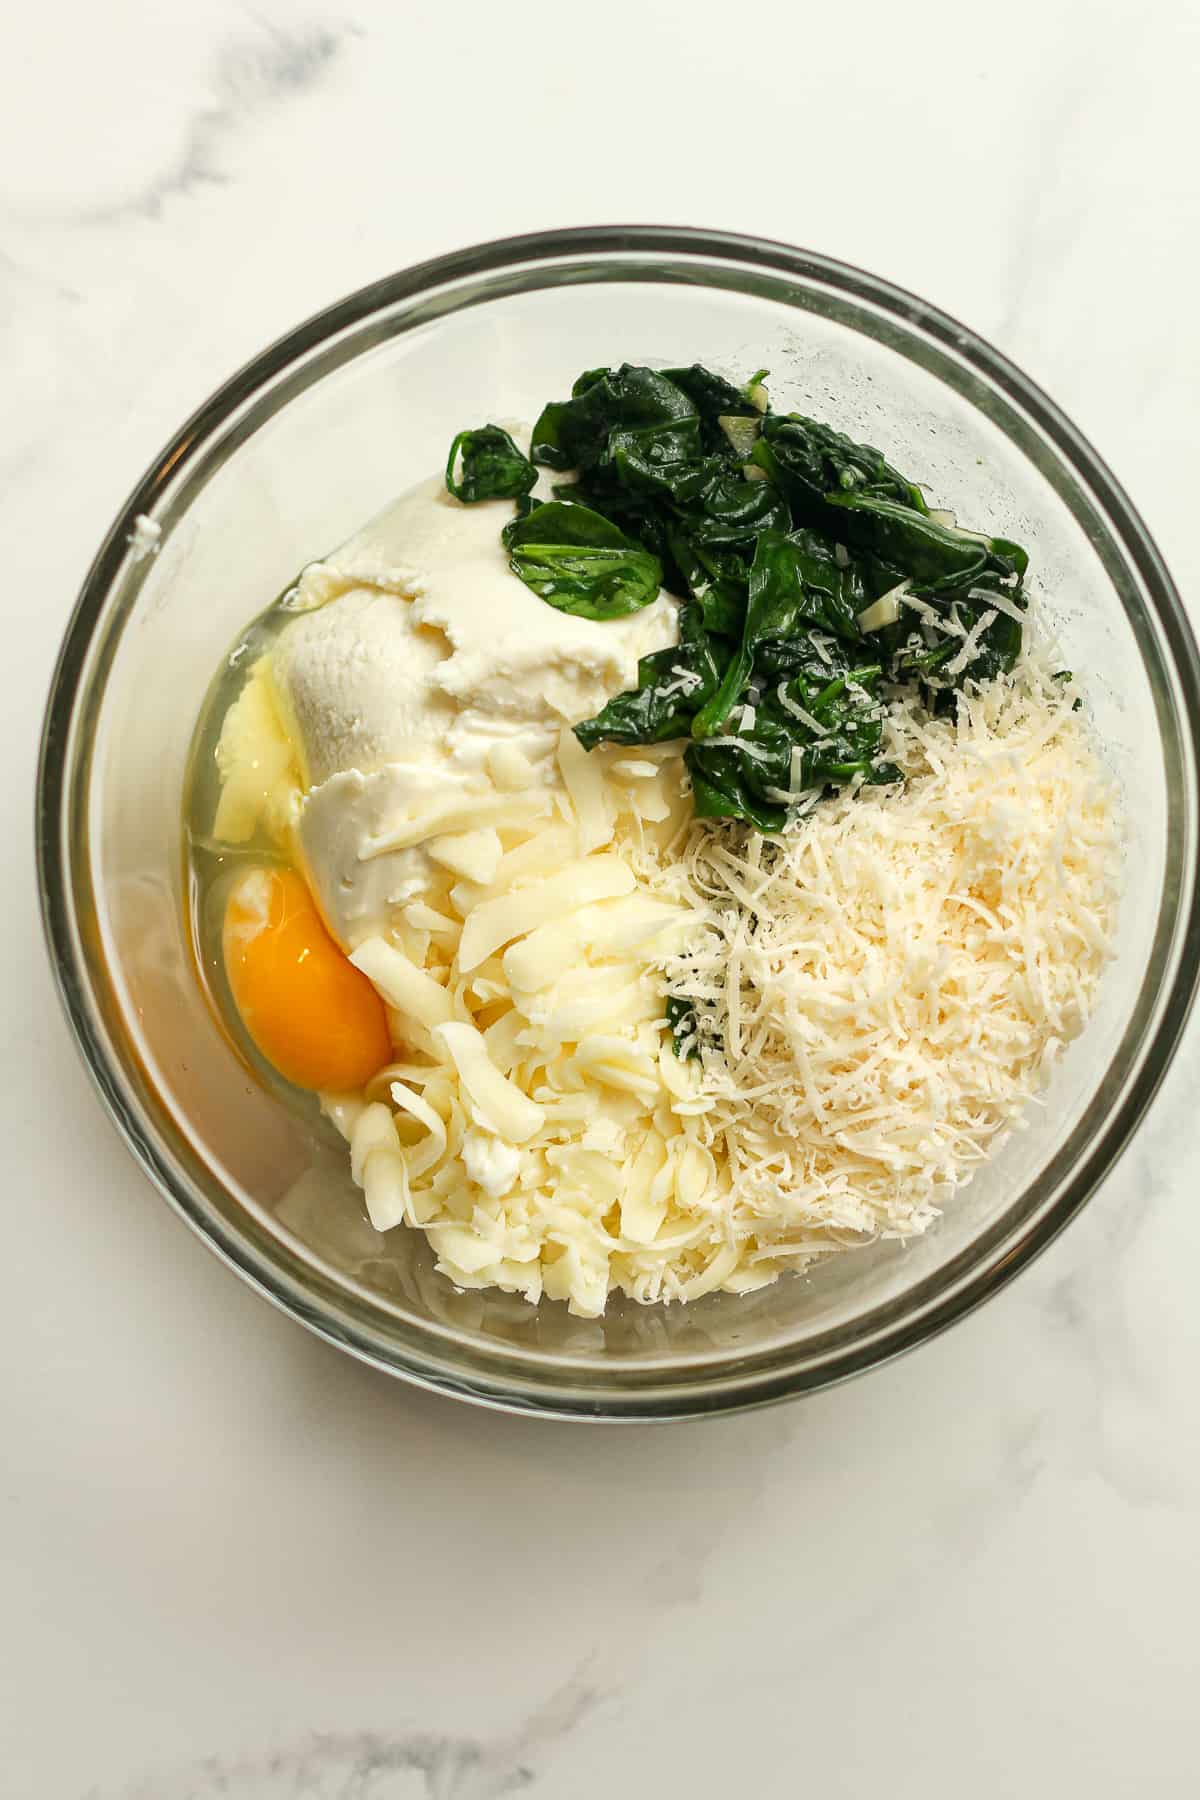 A bowl of the ingredients of spinach layer before combining.